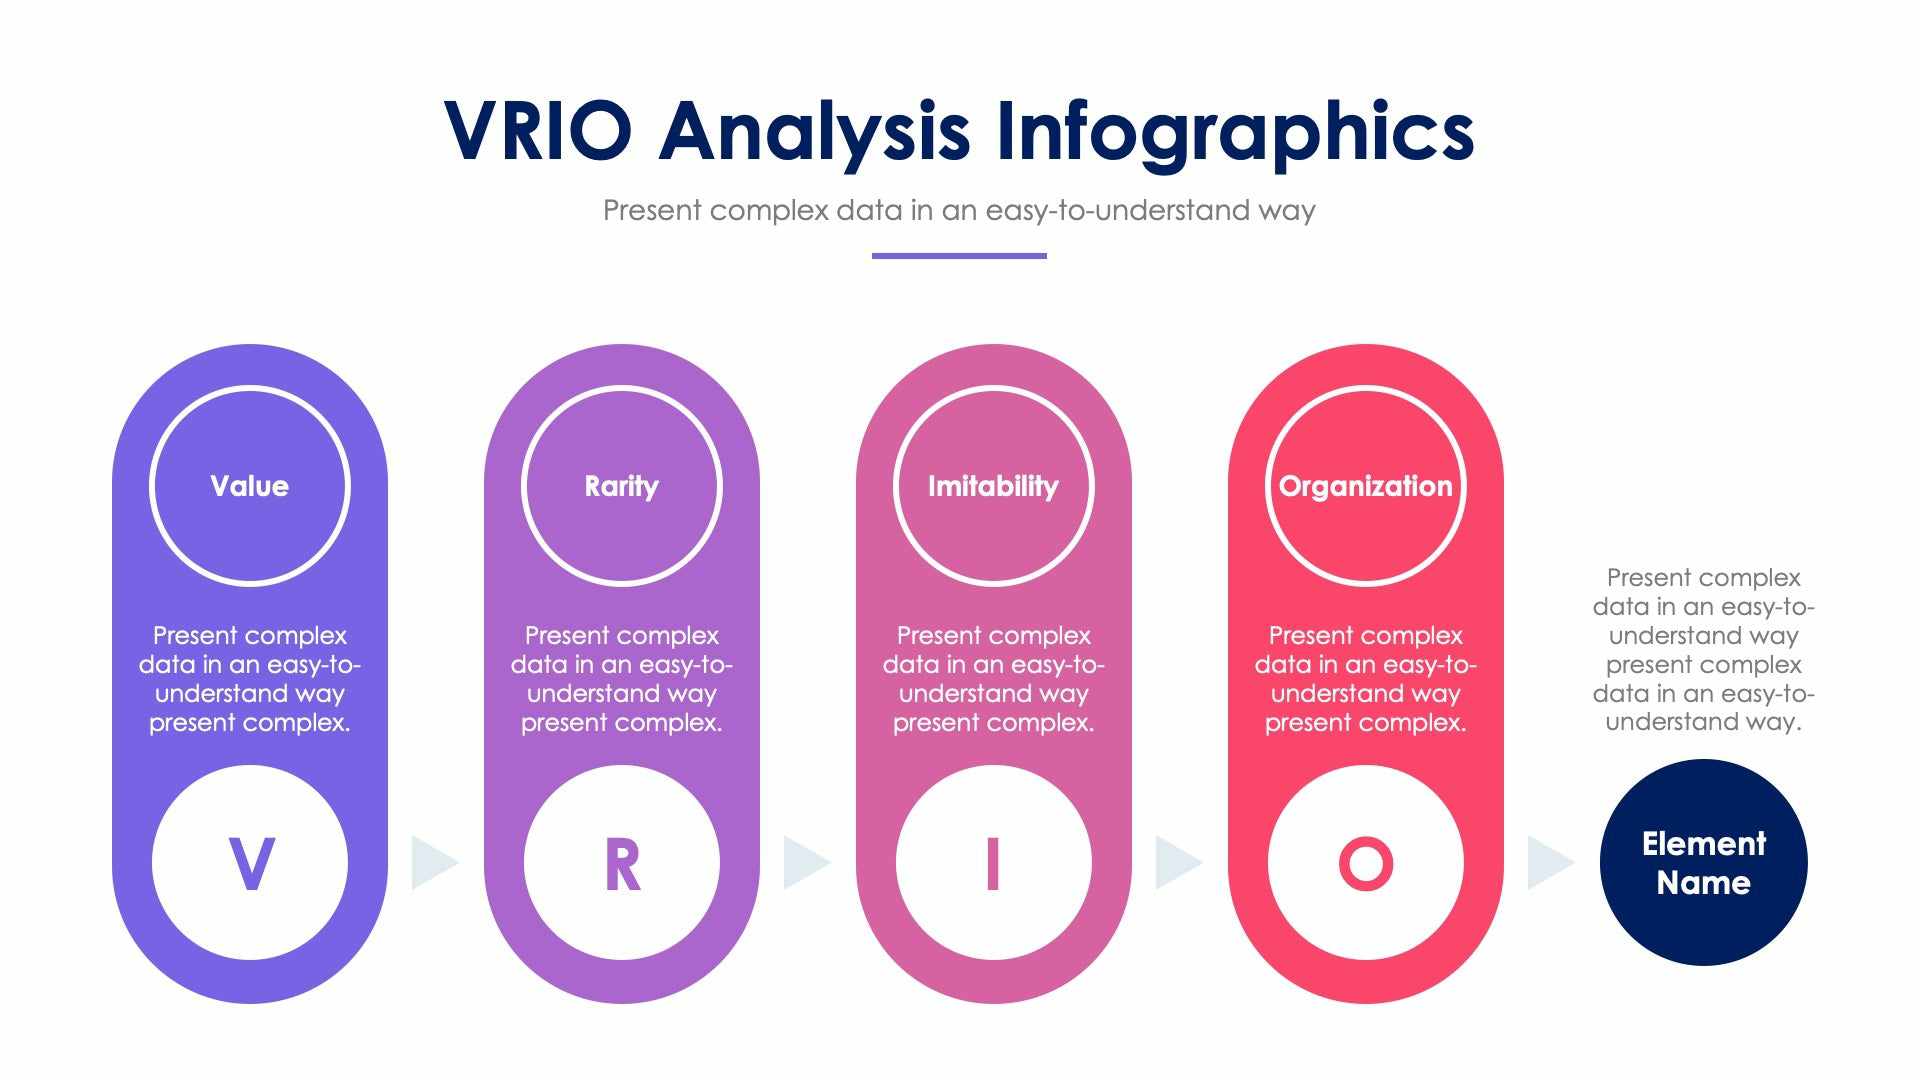 What is a VRIO Analysis